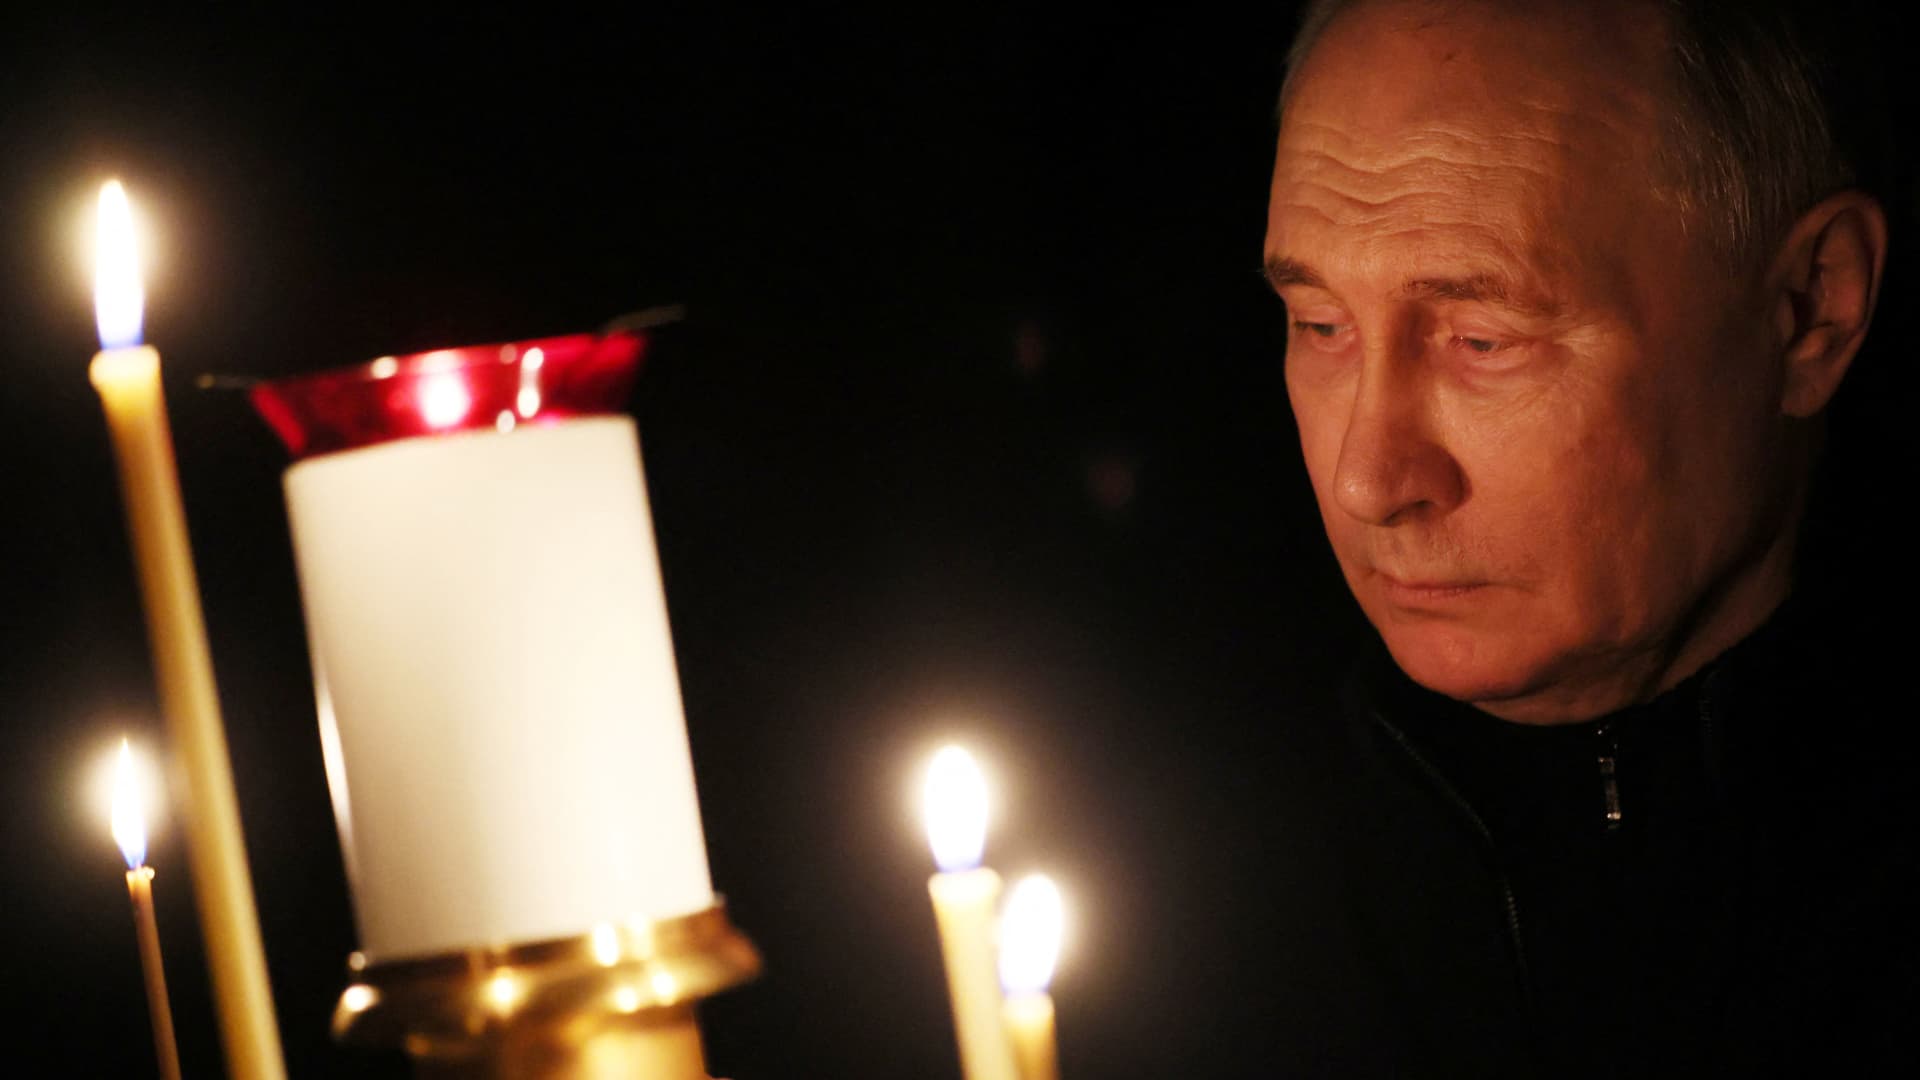 In this pool photograph distributed by the Russian state agency Sputnik, Russia's President Vladimir Putin lights a candle during his visit to a church of the Novo-Ogaryovo state residence outside Moscow on March 24, 2024, as Russia observes a national day of mourning after the Crocus City Hall attack.